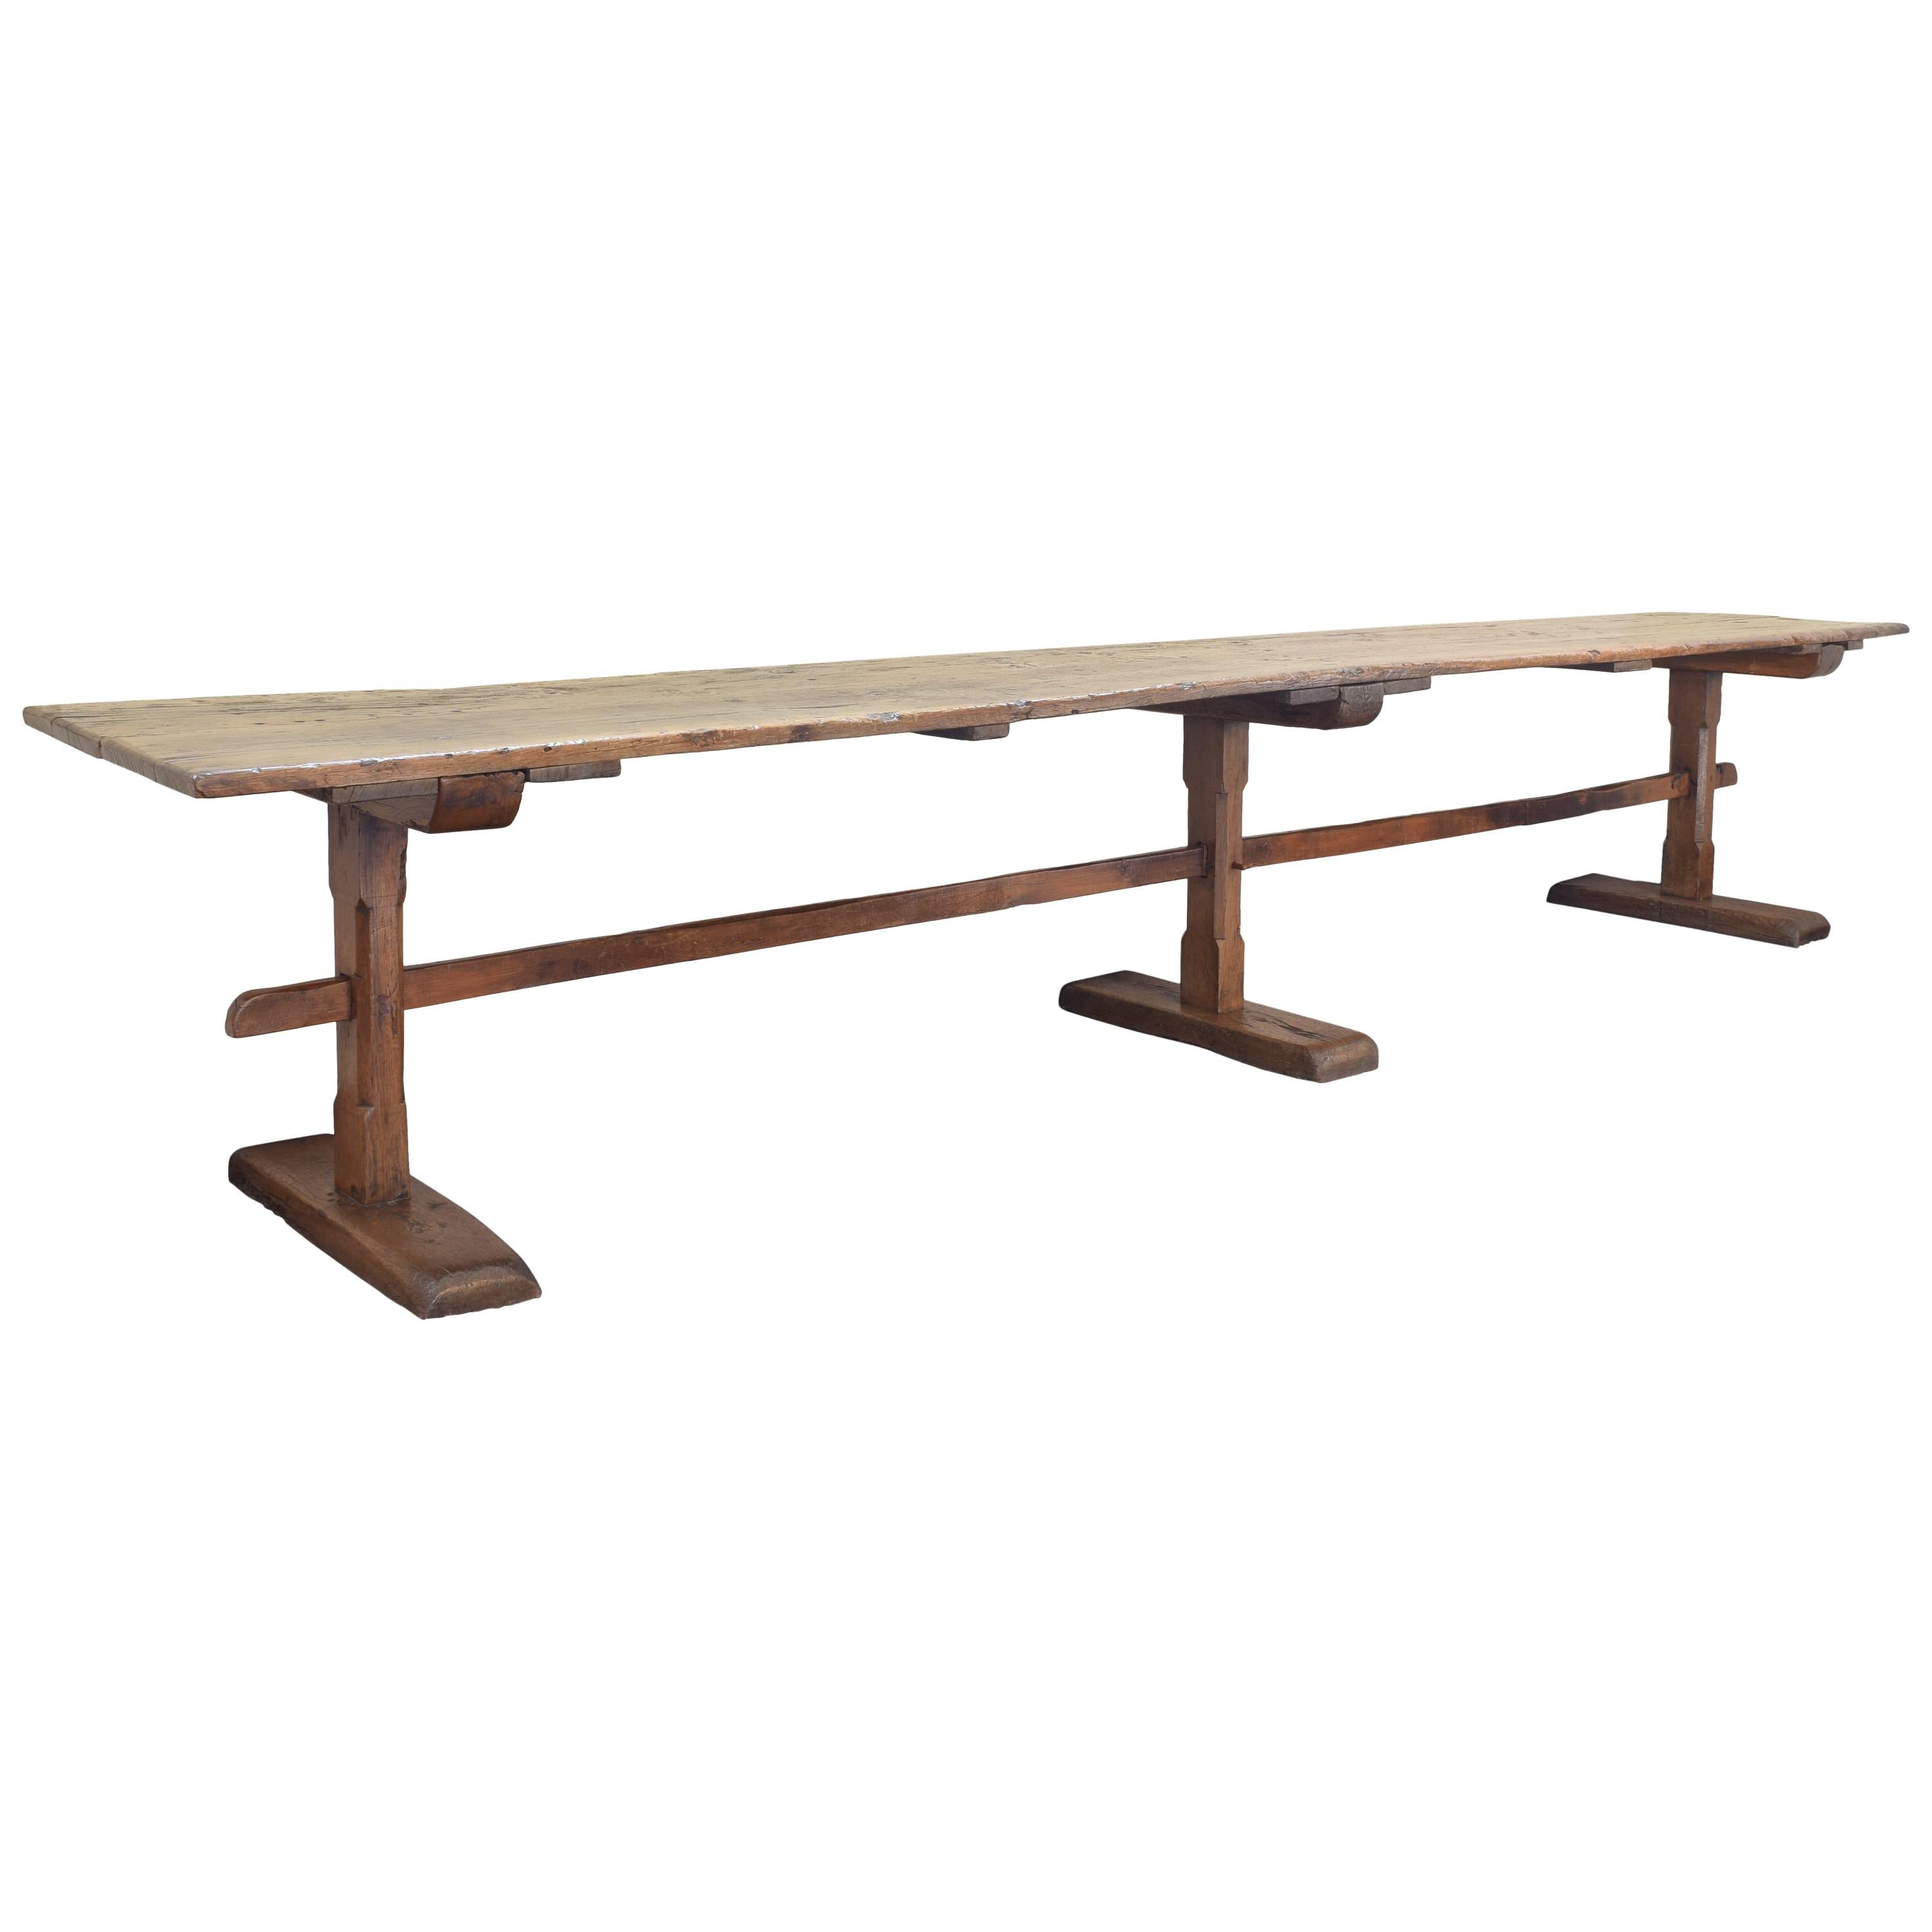 Massive Italian Elmwood Refectory Table from the Mid to Late 16th Century